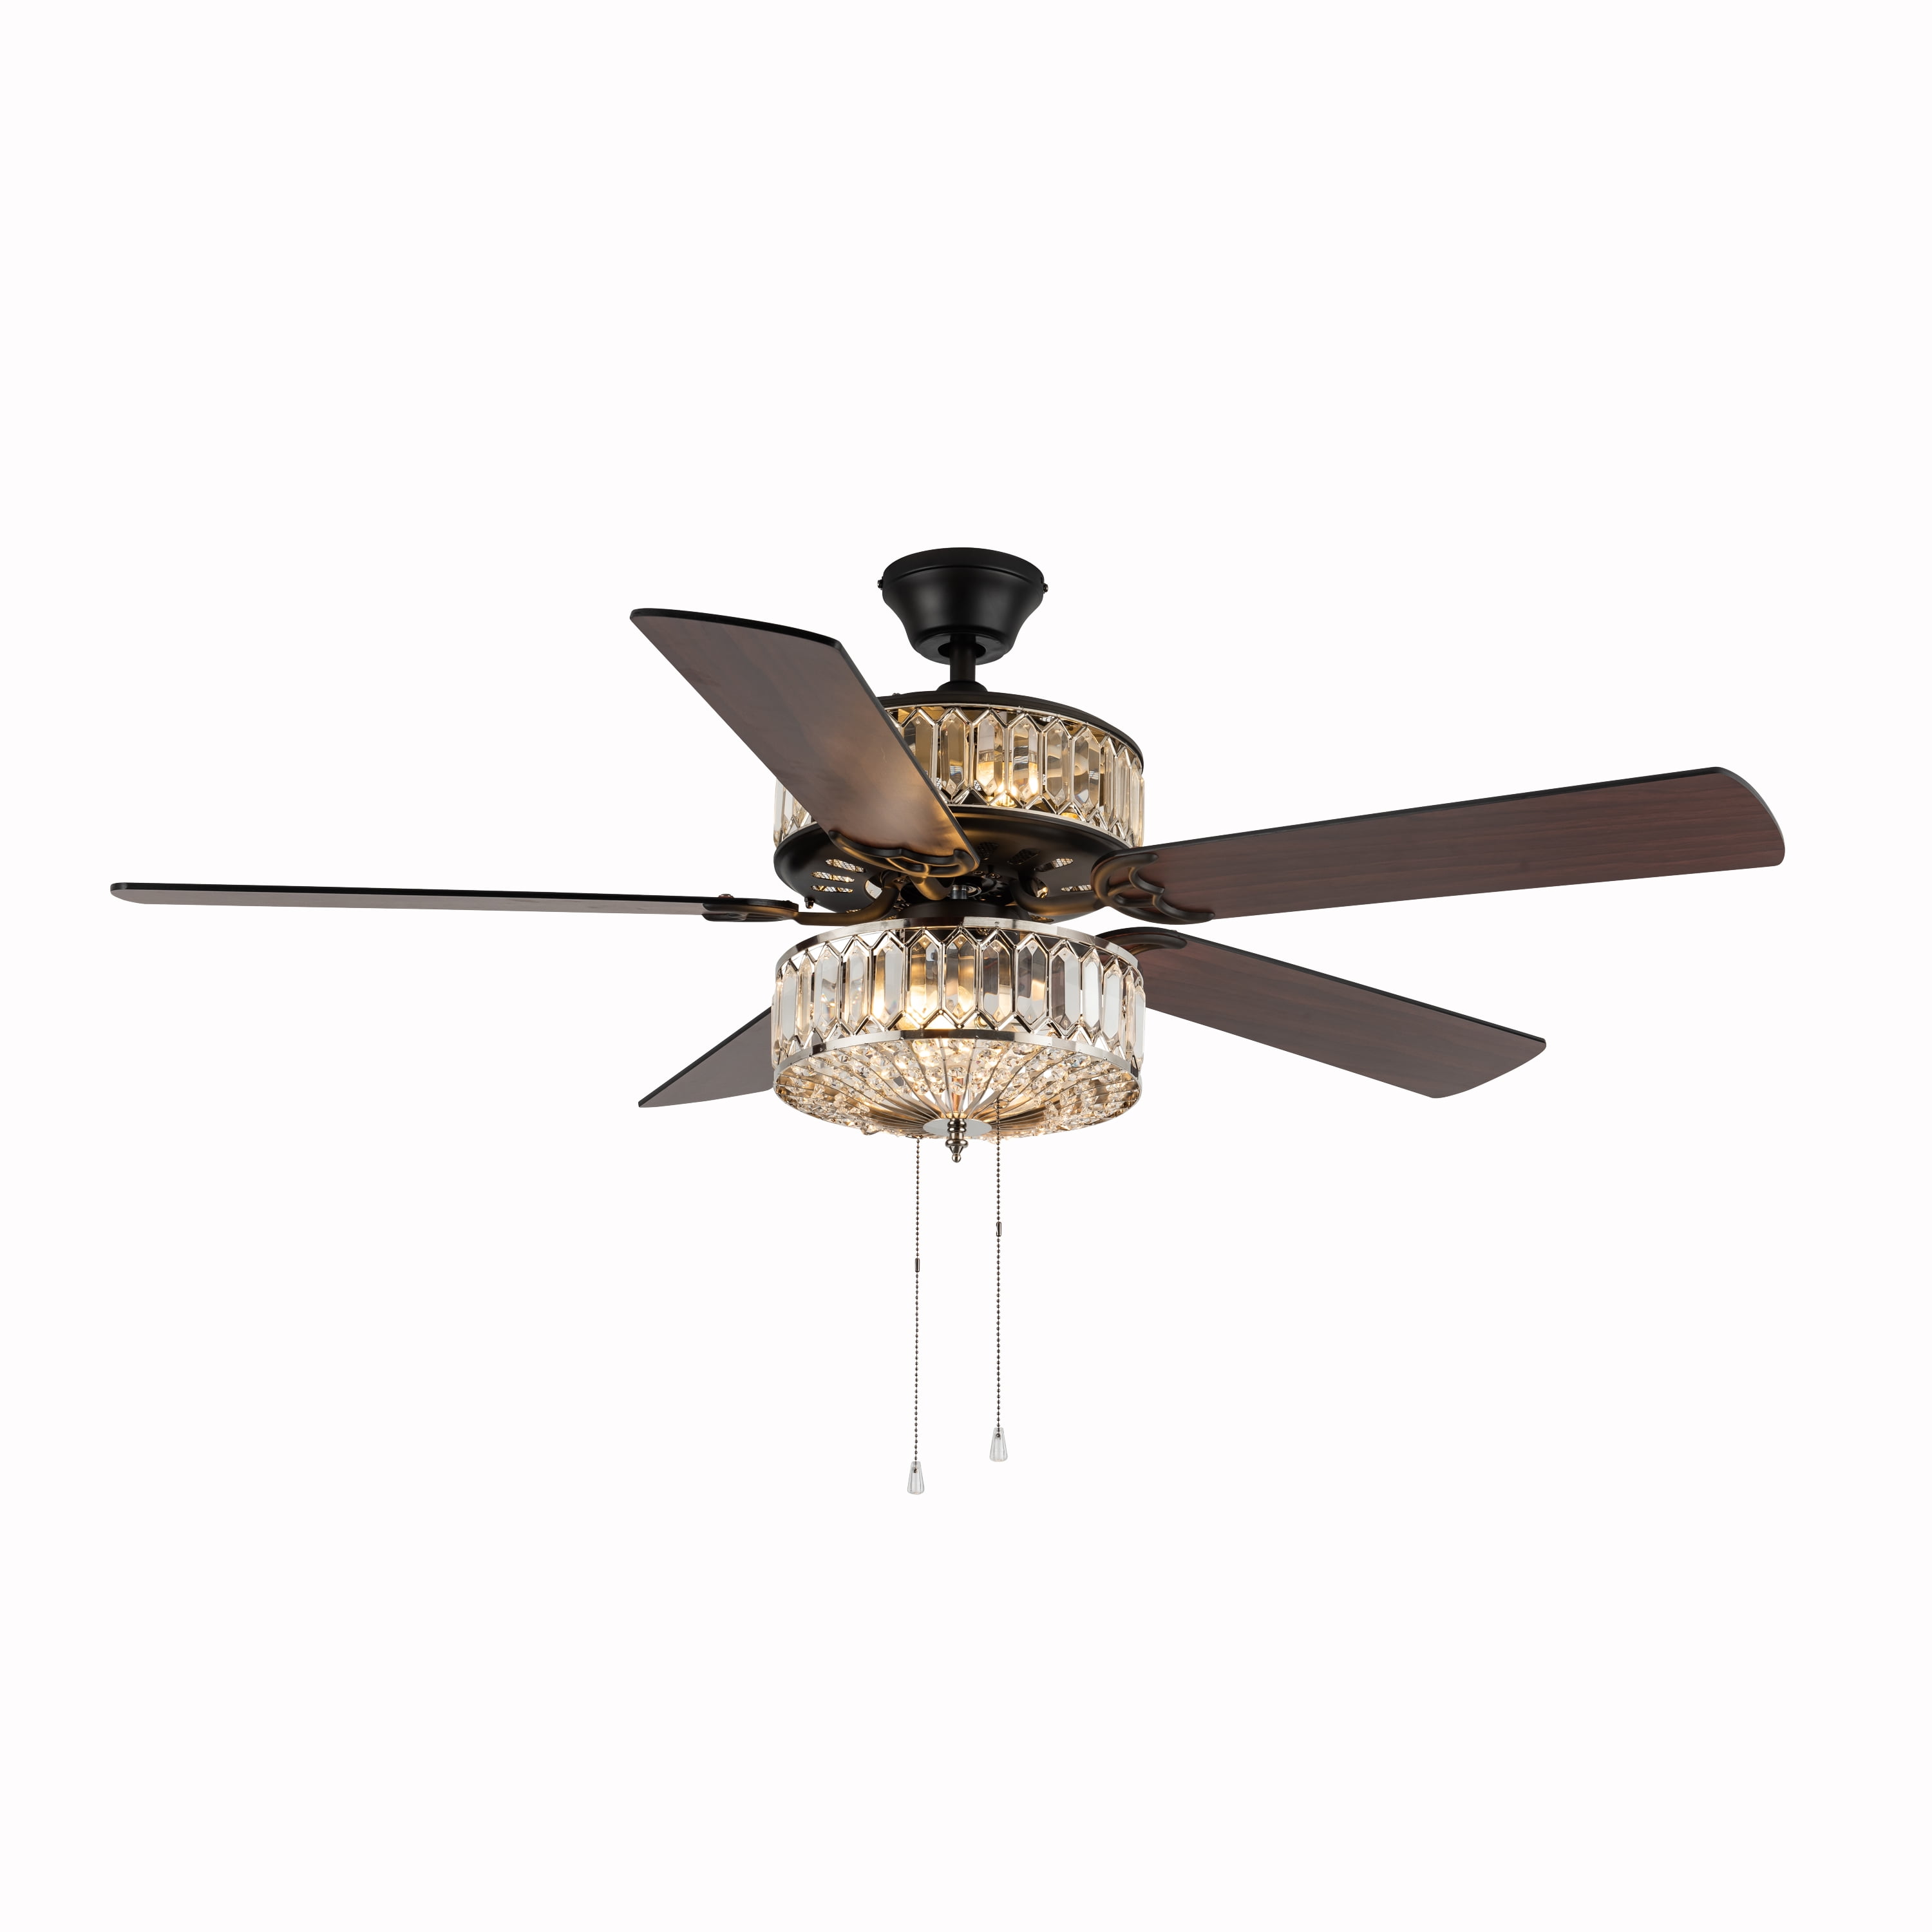 Details about   52" Rustic Farmhouse New Bronze Distressed Wood Indoor Ceiling Fan Cage Light 